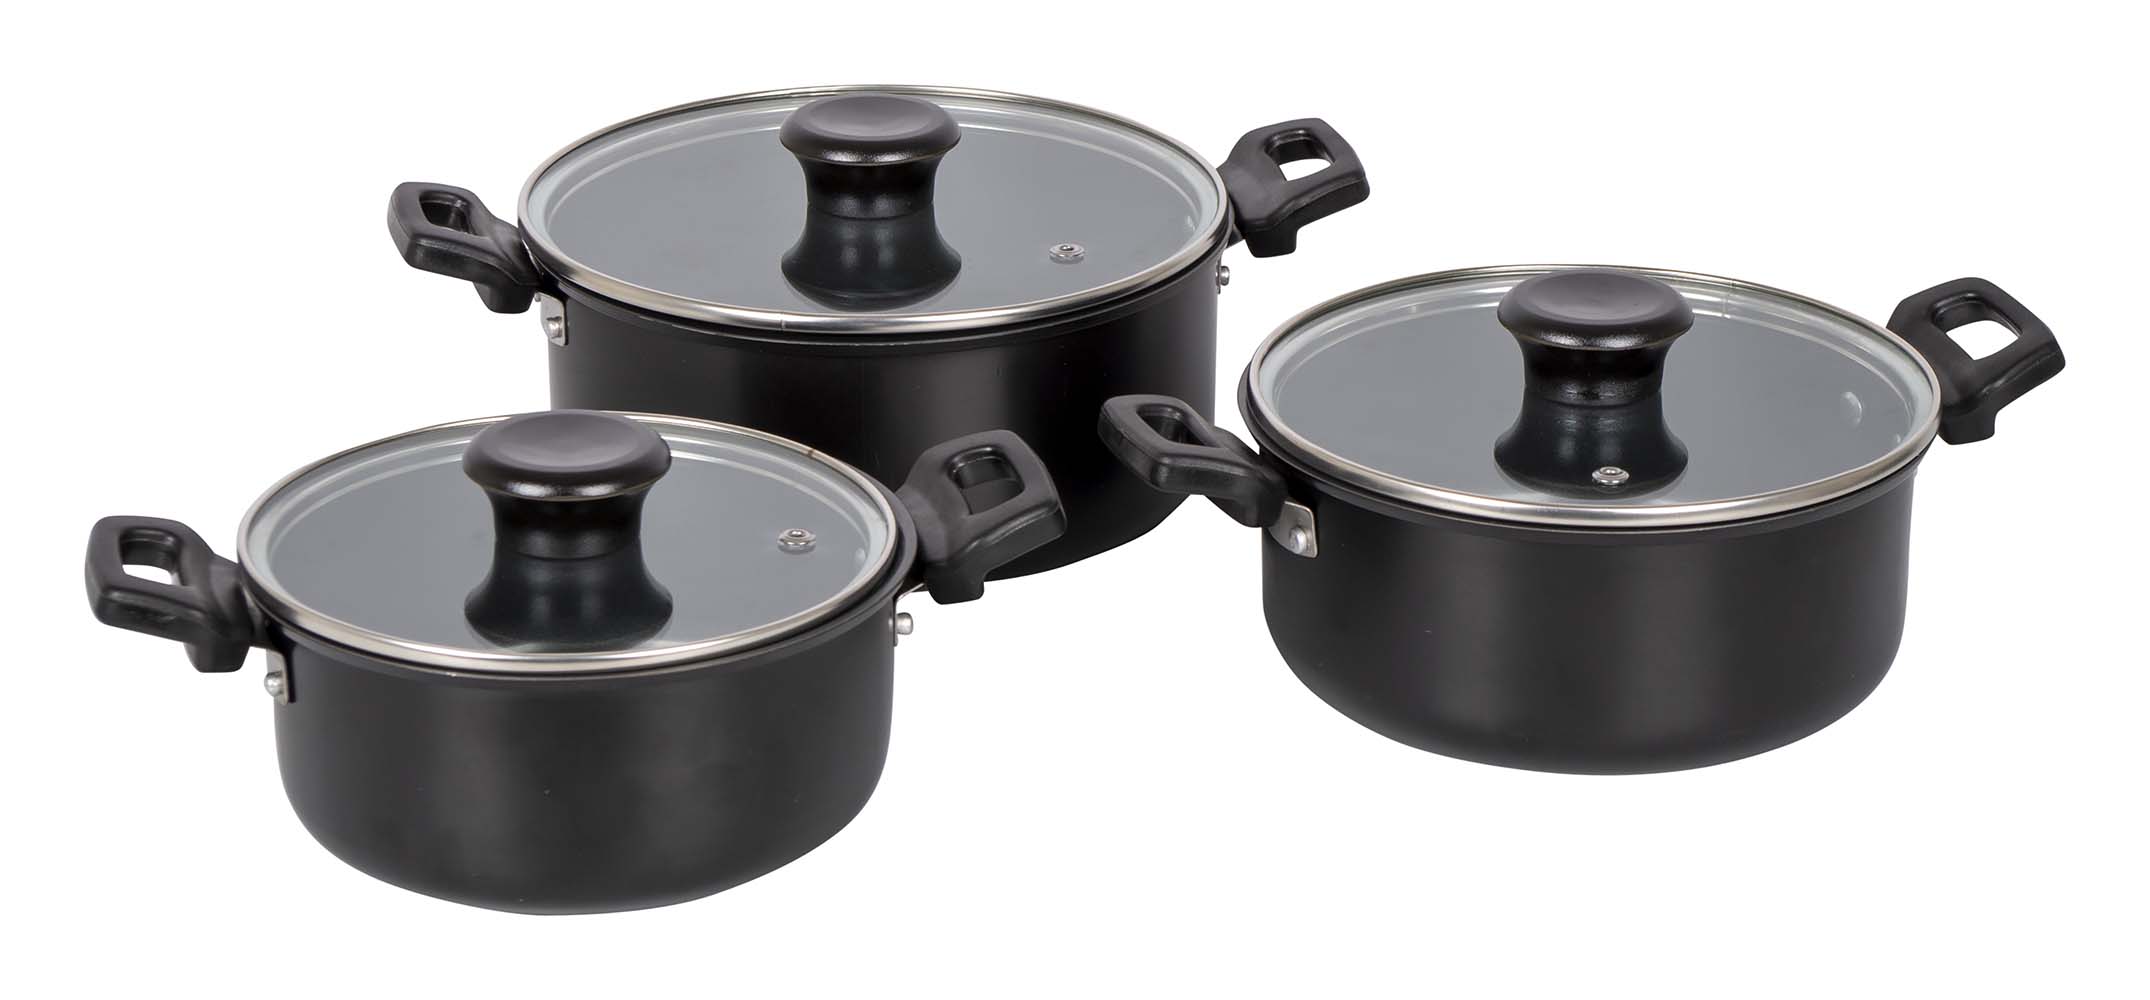 2300310 A luxurious and stylish 3-piece cookware set. Consisting of 3 cooking pans made of strong carbon steel. In addition, each pan is equipped with heat-resistant handles, a non-stick coating and a glass lid. Suitable for heat sources gas, ceramic and electric. Dimensions (Øxh): 18x7,5, 19,5x8 and 21x10 cm. Contents: 1, 1.25 and 2.5 liters.